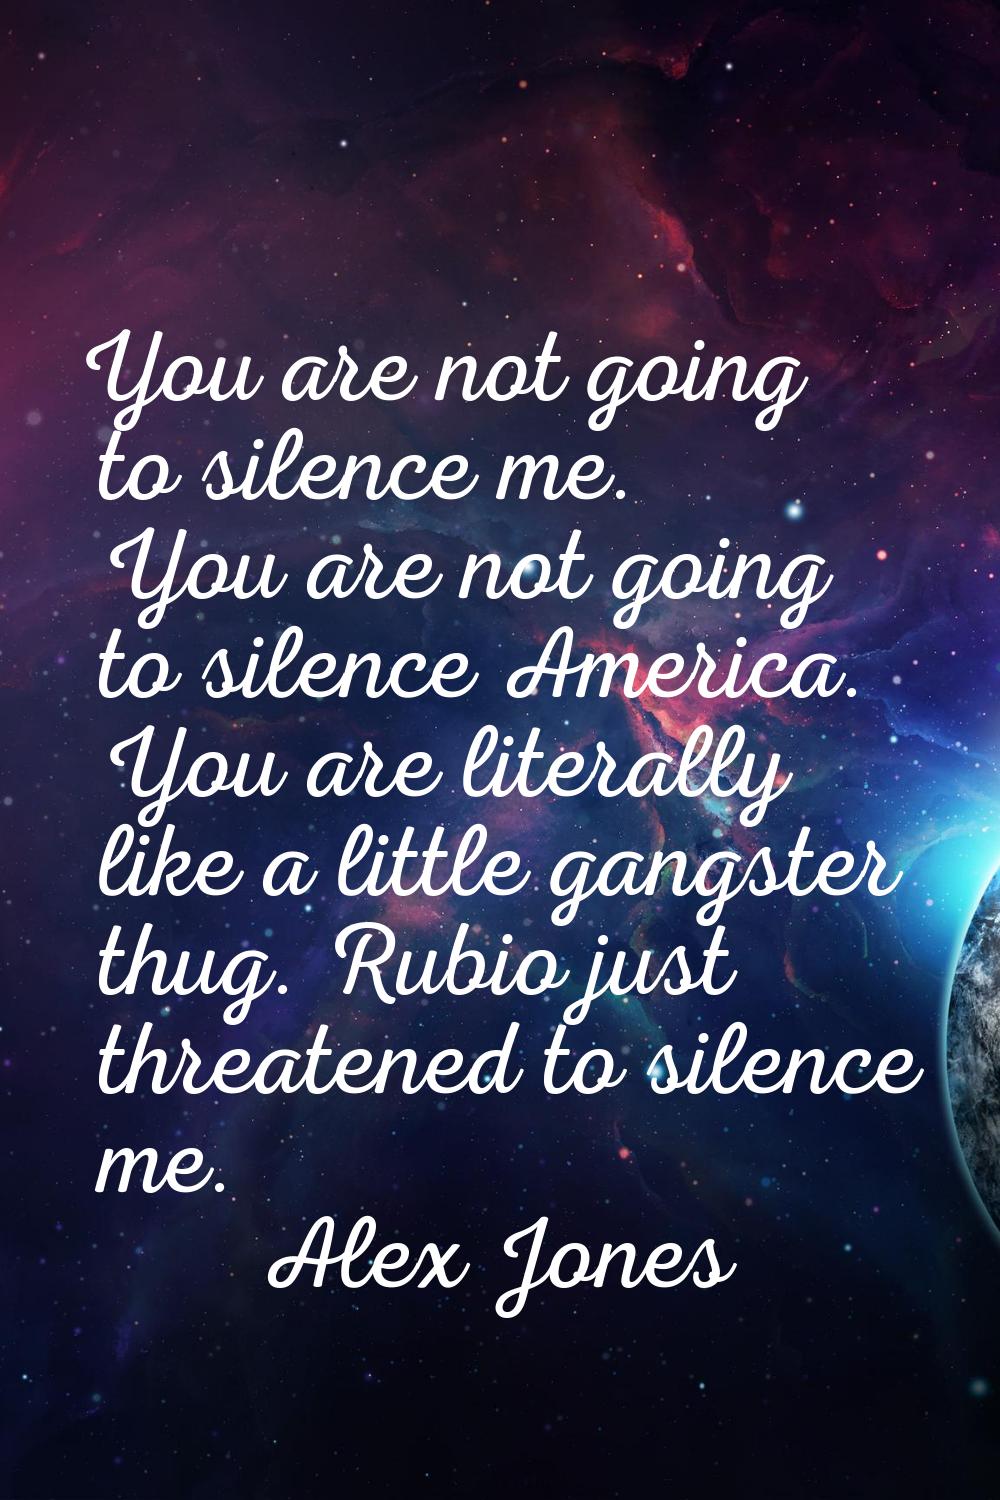 You are not going to silence me. You are not going to silence America. You are literally like a lit